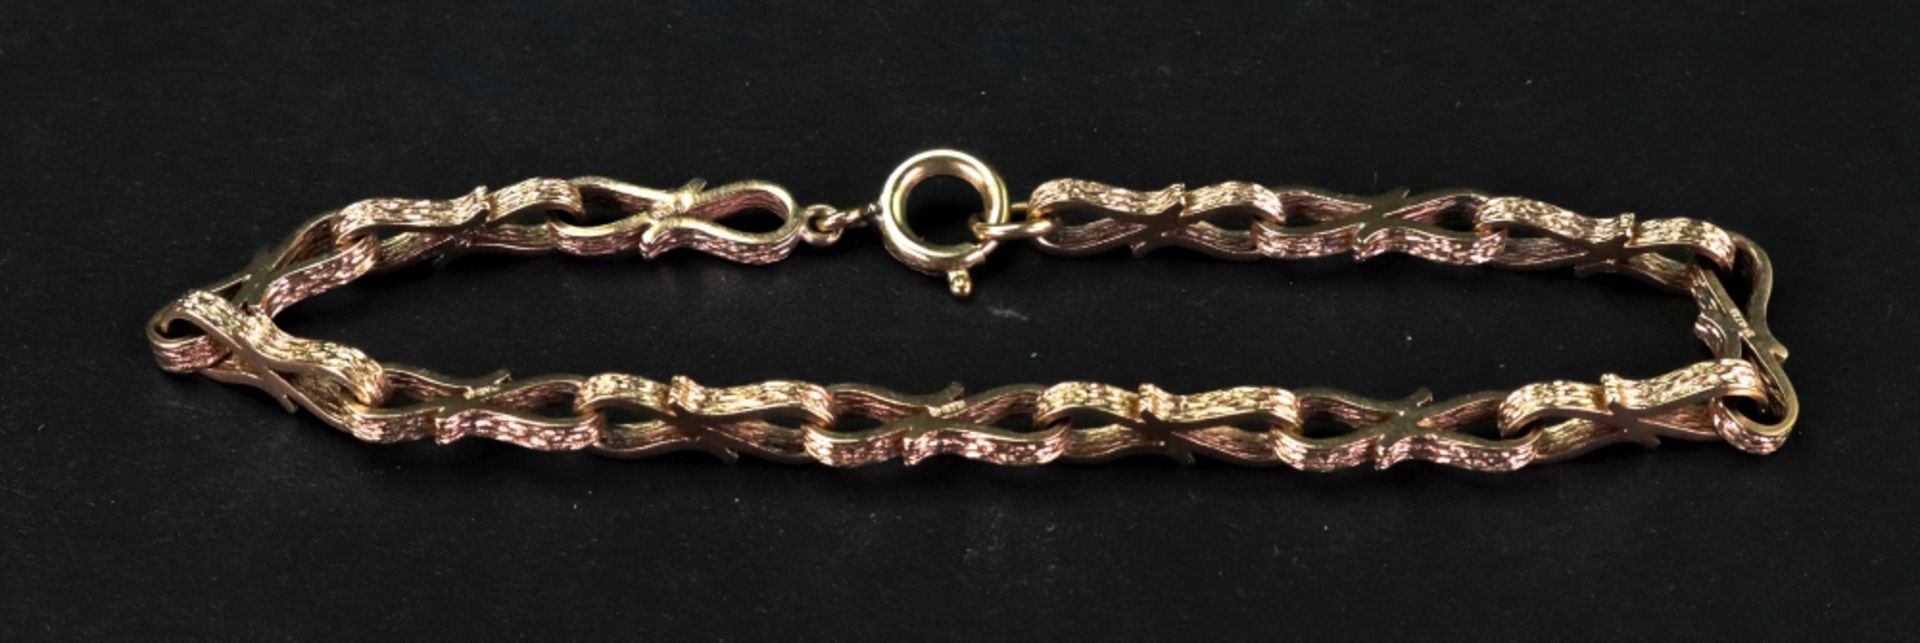 A gold fancy link bracelet, the links mounted at alternate angles with textured finish,